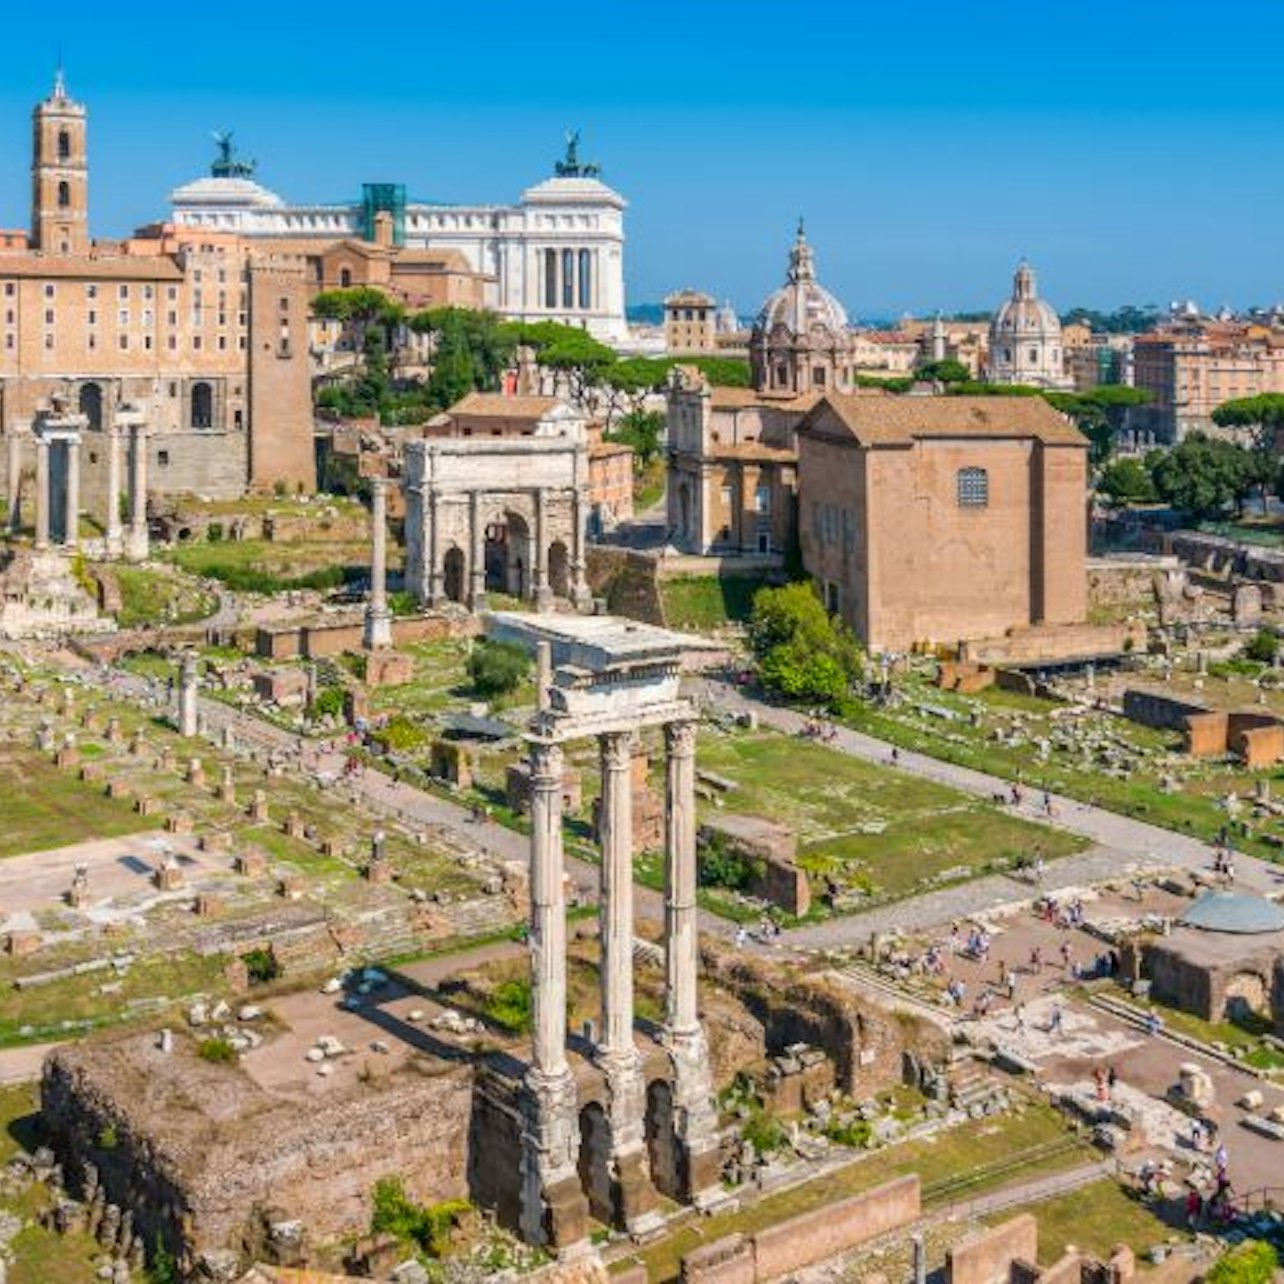 Vatican, St. Peter’s and Colosseum Pass: Entry Tickets + Public Transport - Accommodations in Rome